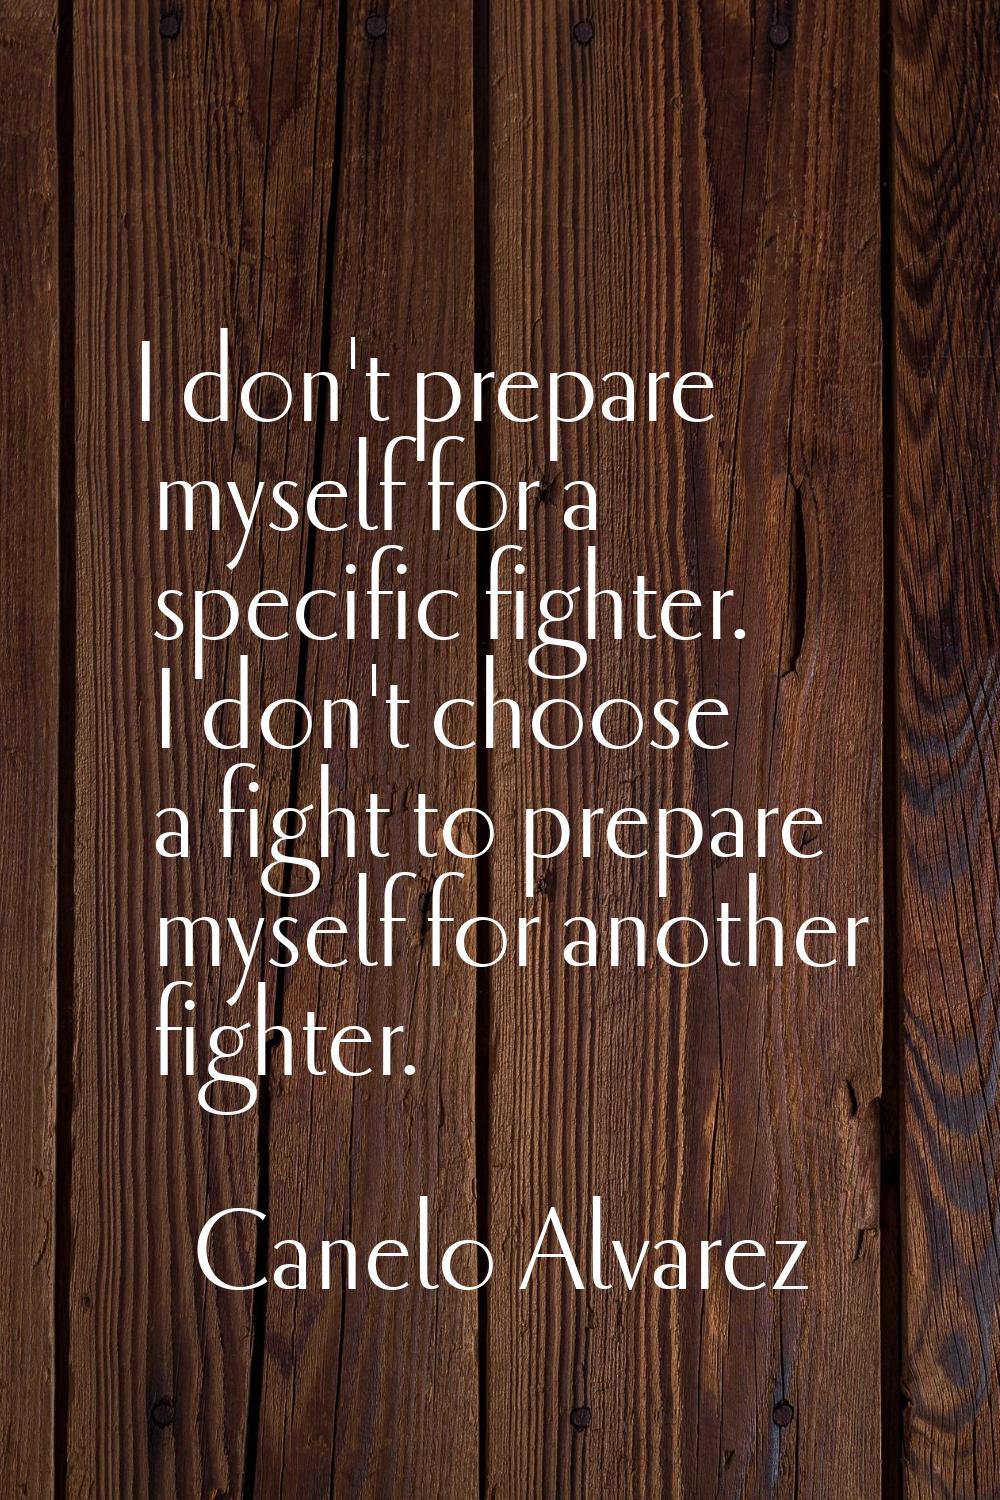 I don't prepare myself for a specific fighter. I don't choose a fight to prepare myself for another